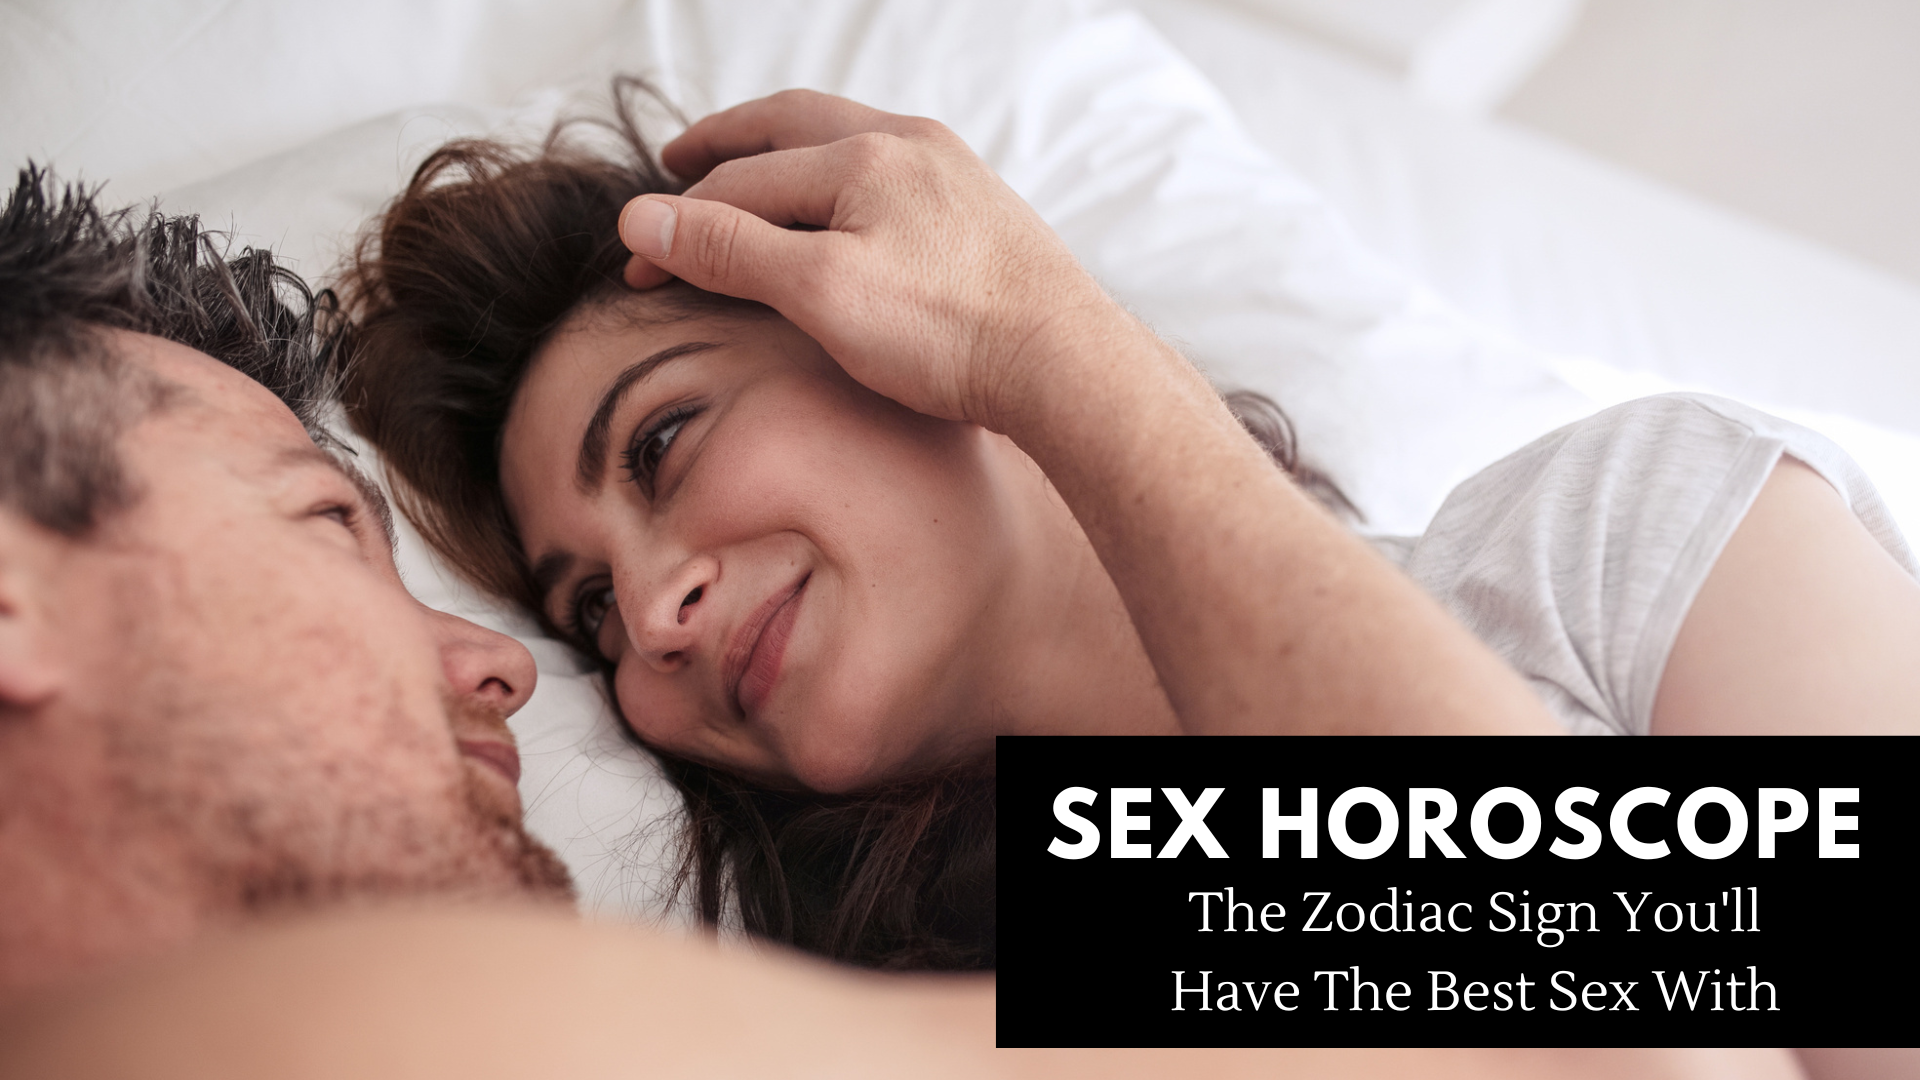 Sex Horoscope - The Zodiac Sign You'll Have The Best Sex With